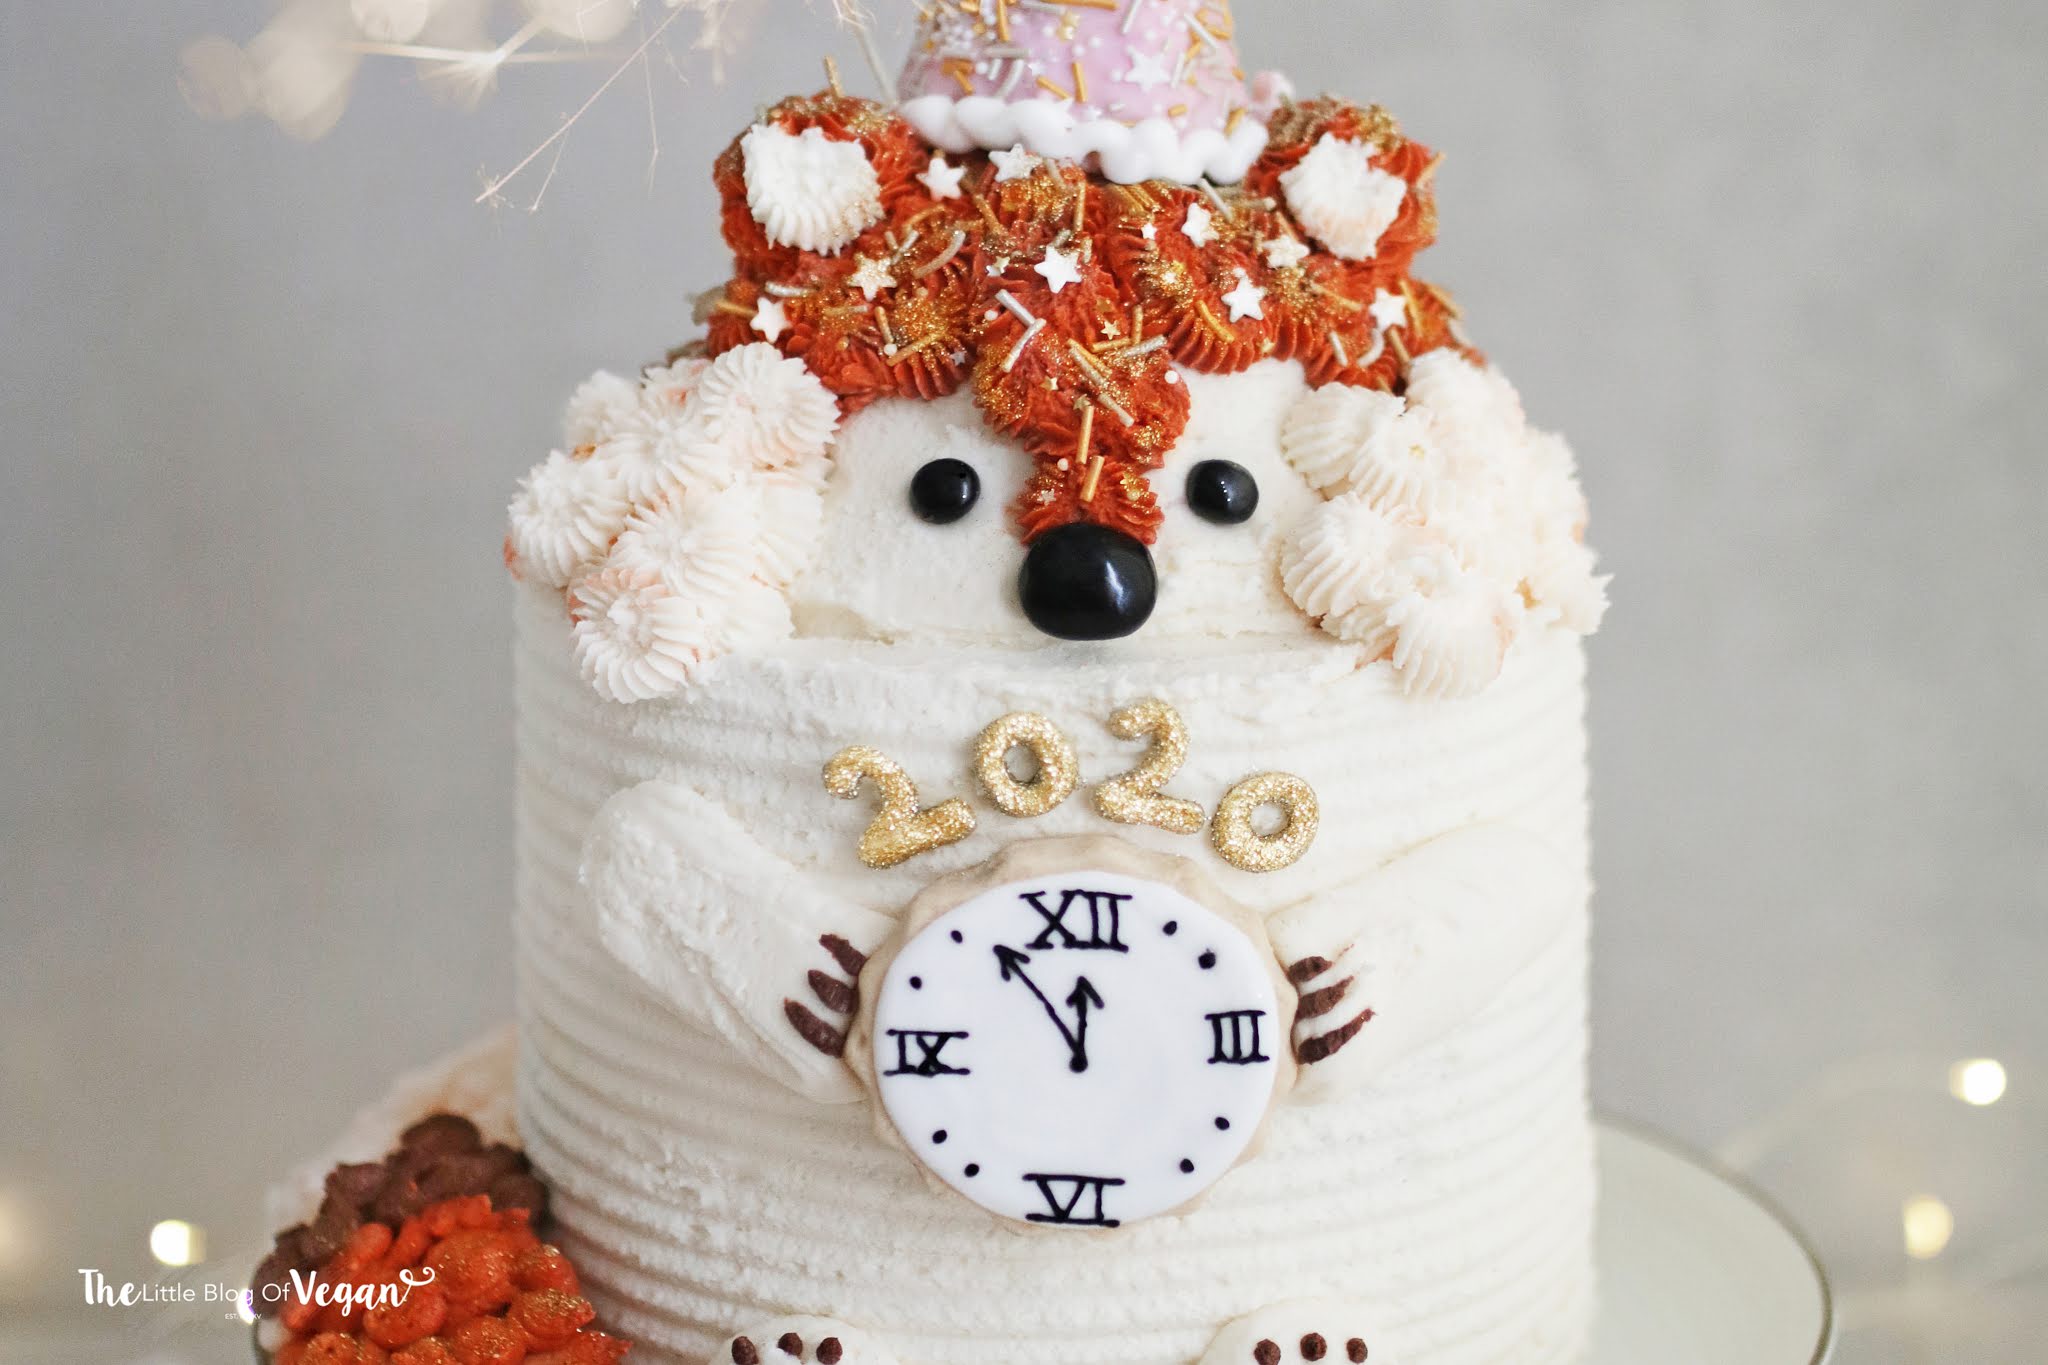 38+ Beautiful Cake Designs To Swoon : Cute Birthday Cake for 22nd Birthday